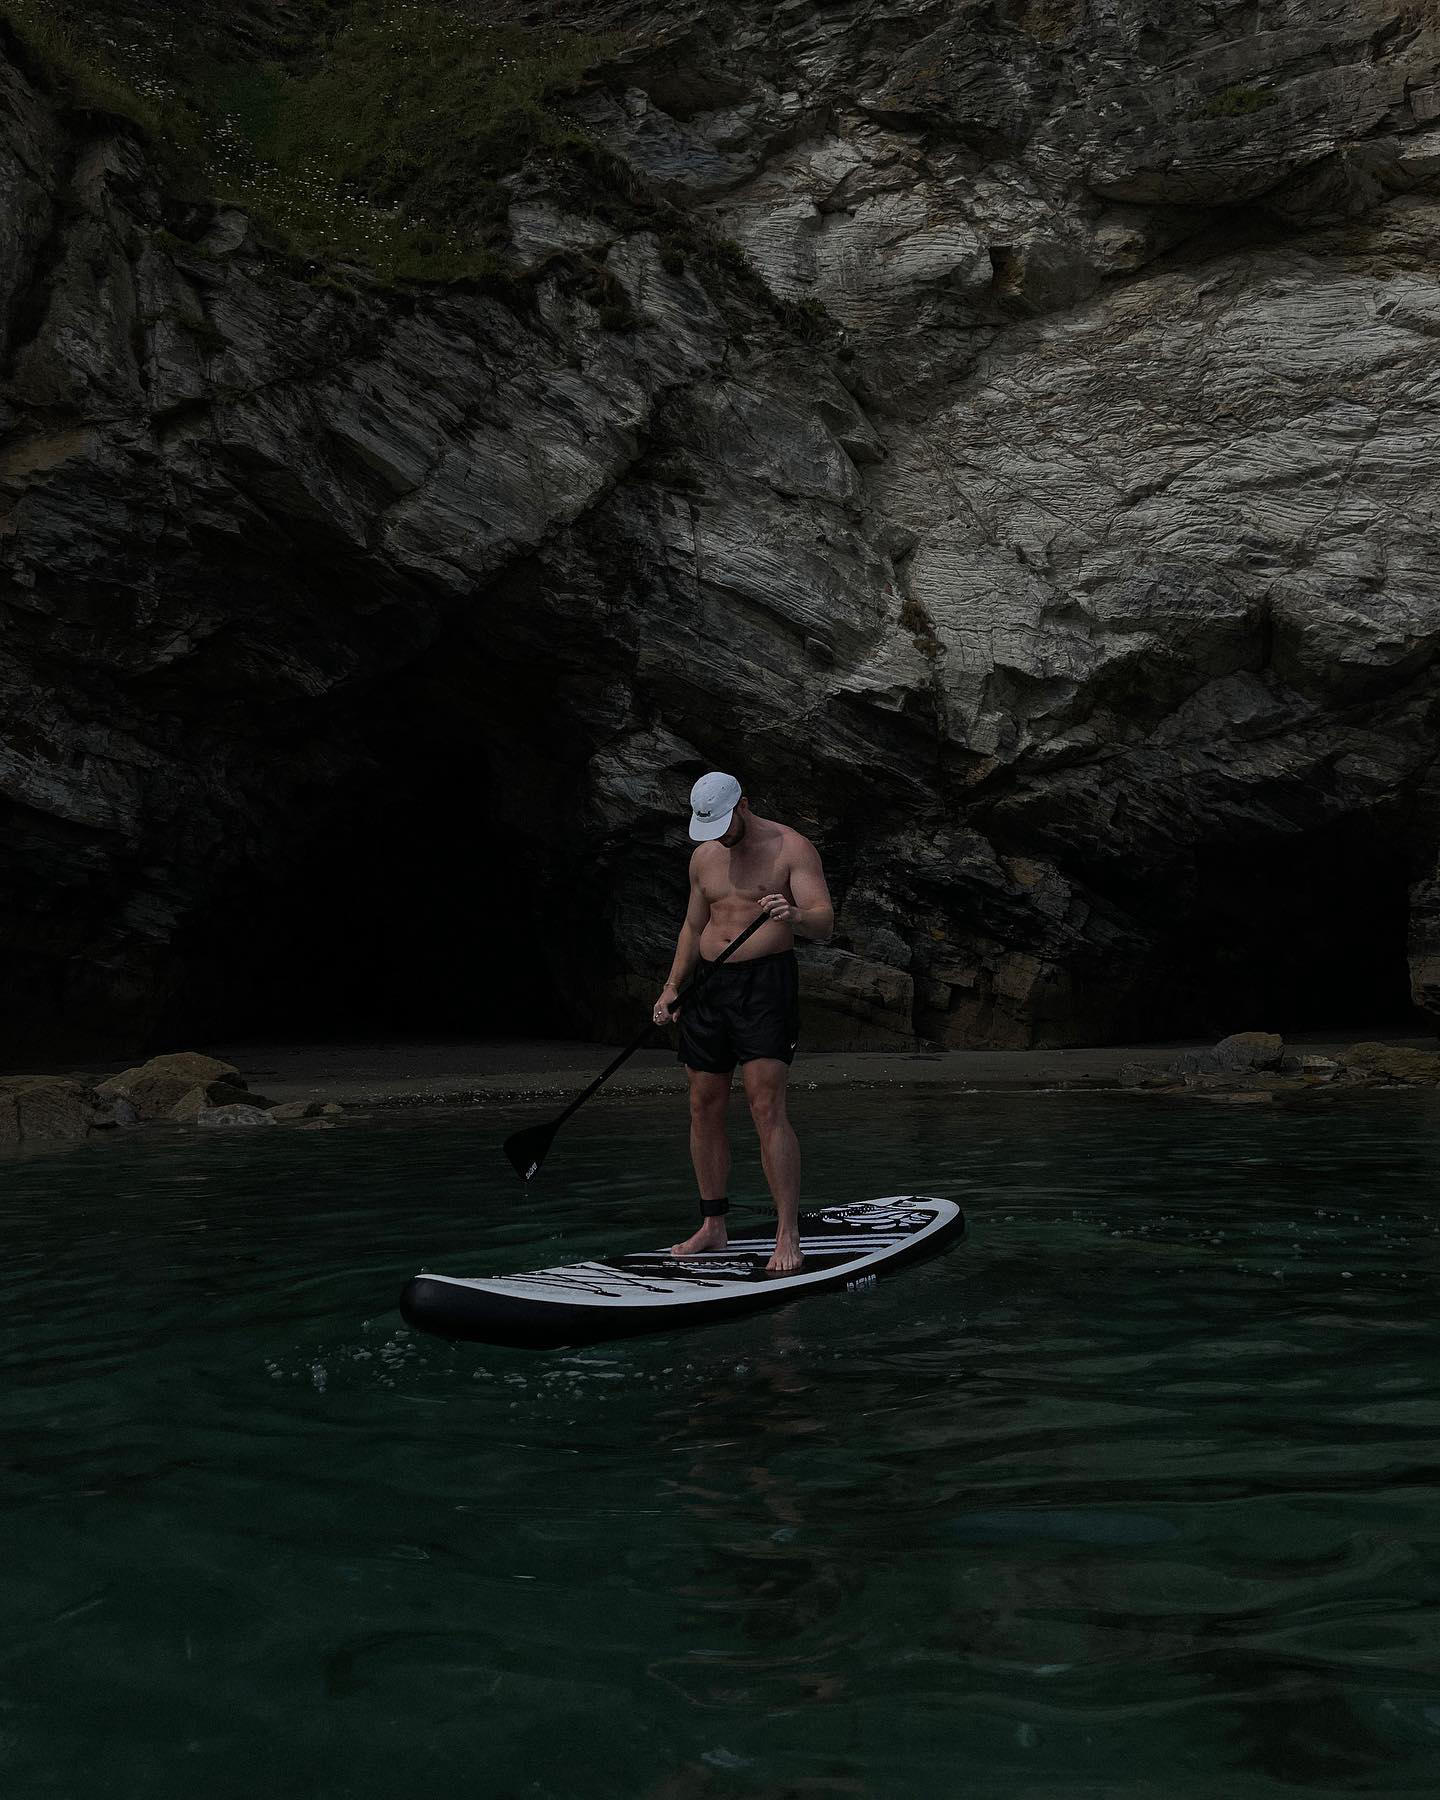 image  1 JH - Paddleboarding is an elite water sport… and yes the water was freezing